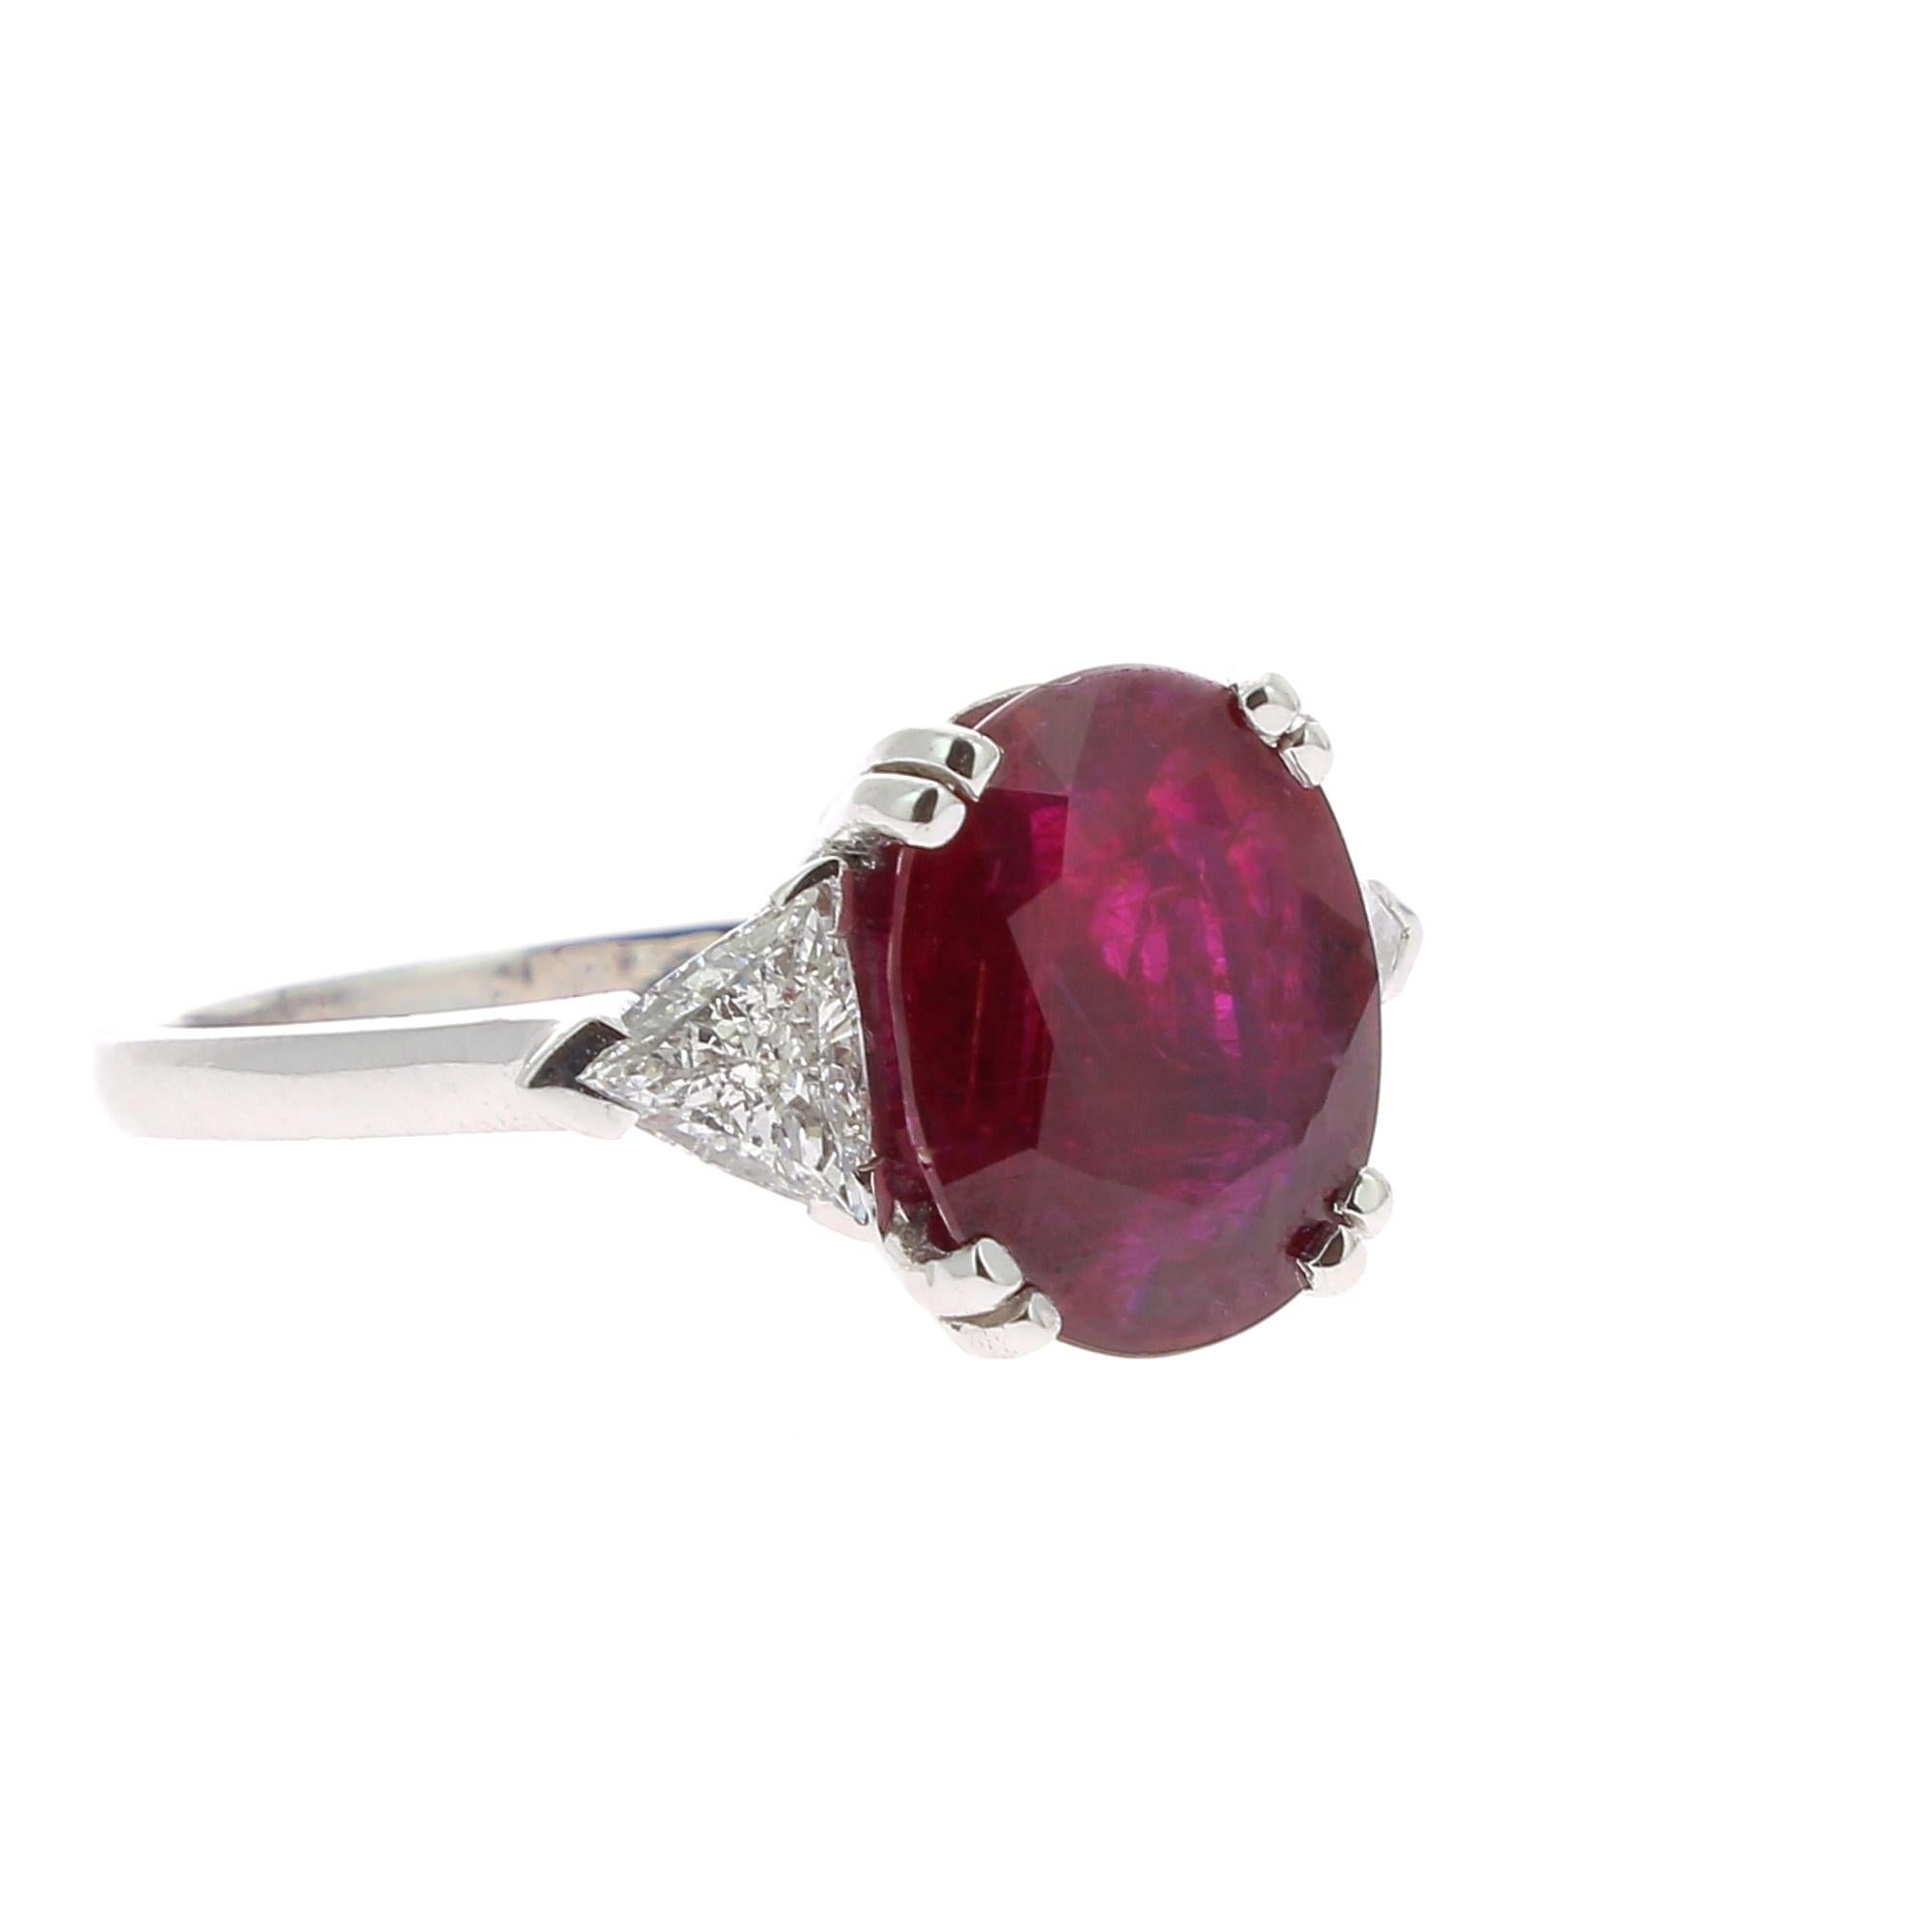 An amazing Ruby Ring set with 2 Triangle Diamond.
The total weight of the Ruby is 4.20 Carats, the gemstone is certified. 
The ring is set with 2 Triangle Diamonds weighing 0.61 Carats.
The Size of the Natural Ruby ring is 6.5 US / 53 FR / N UK / 53